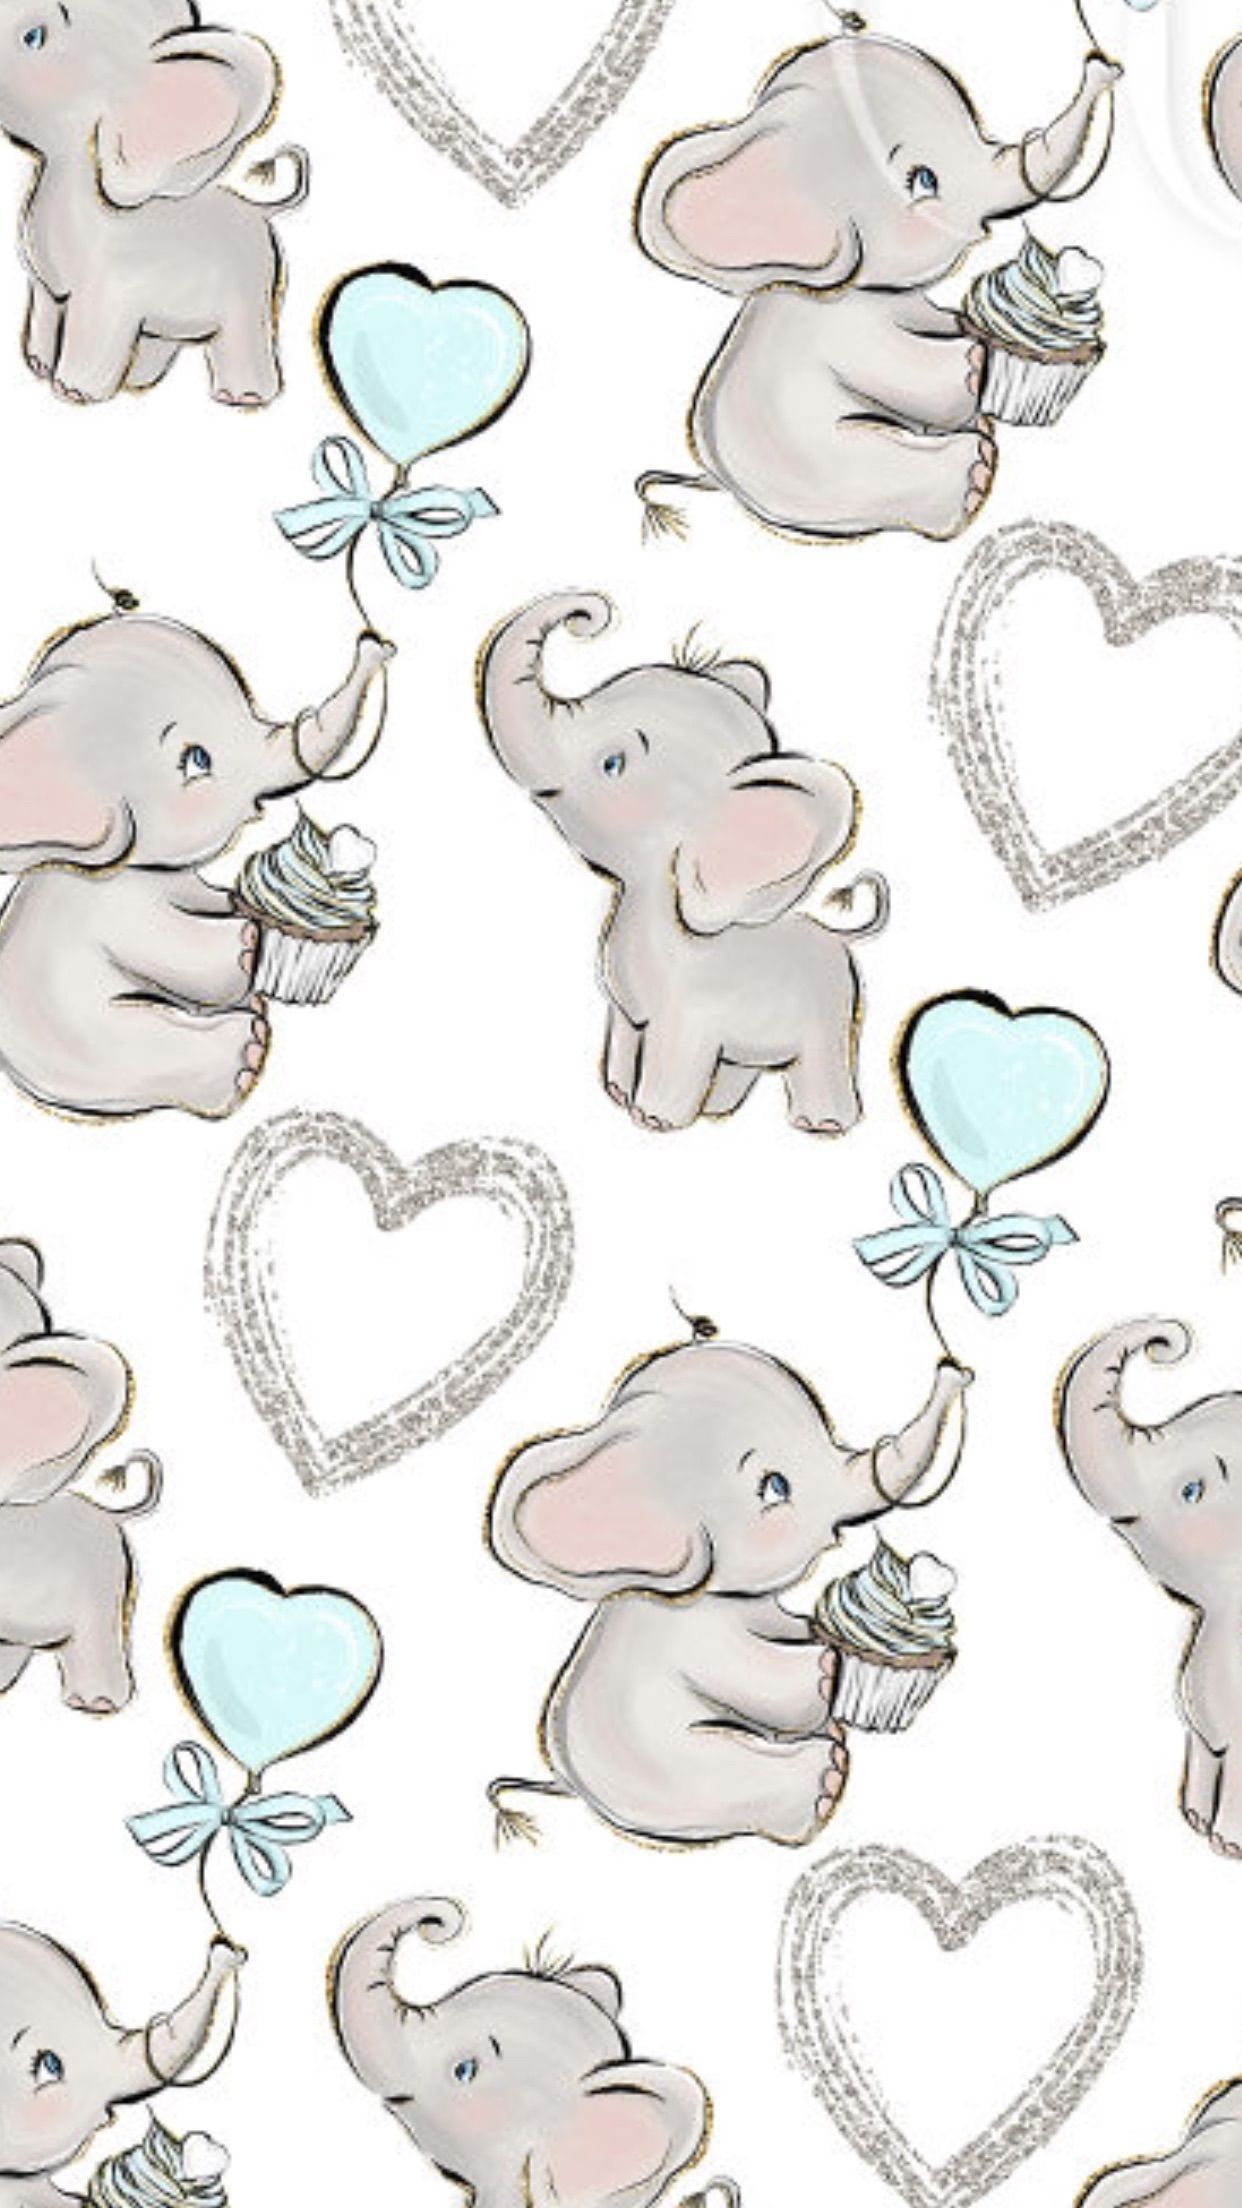 Cute Elephant Aesthetic Wallpapers - Wallpaper Cave